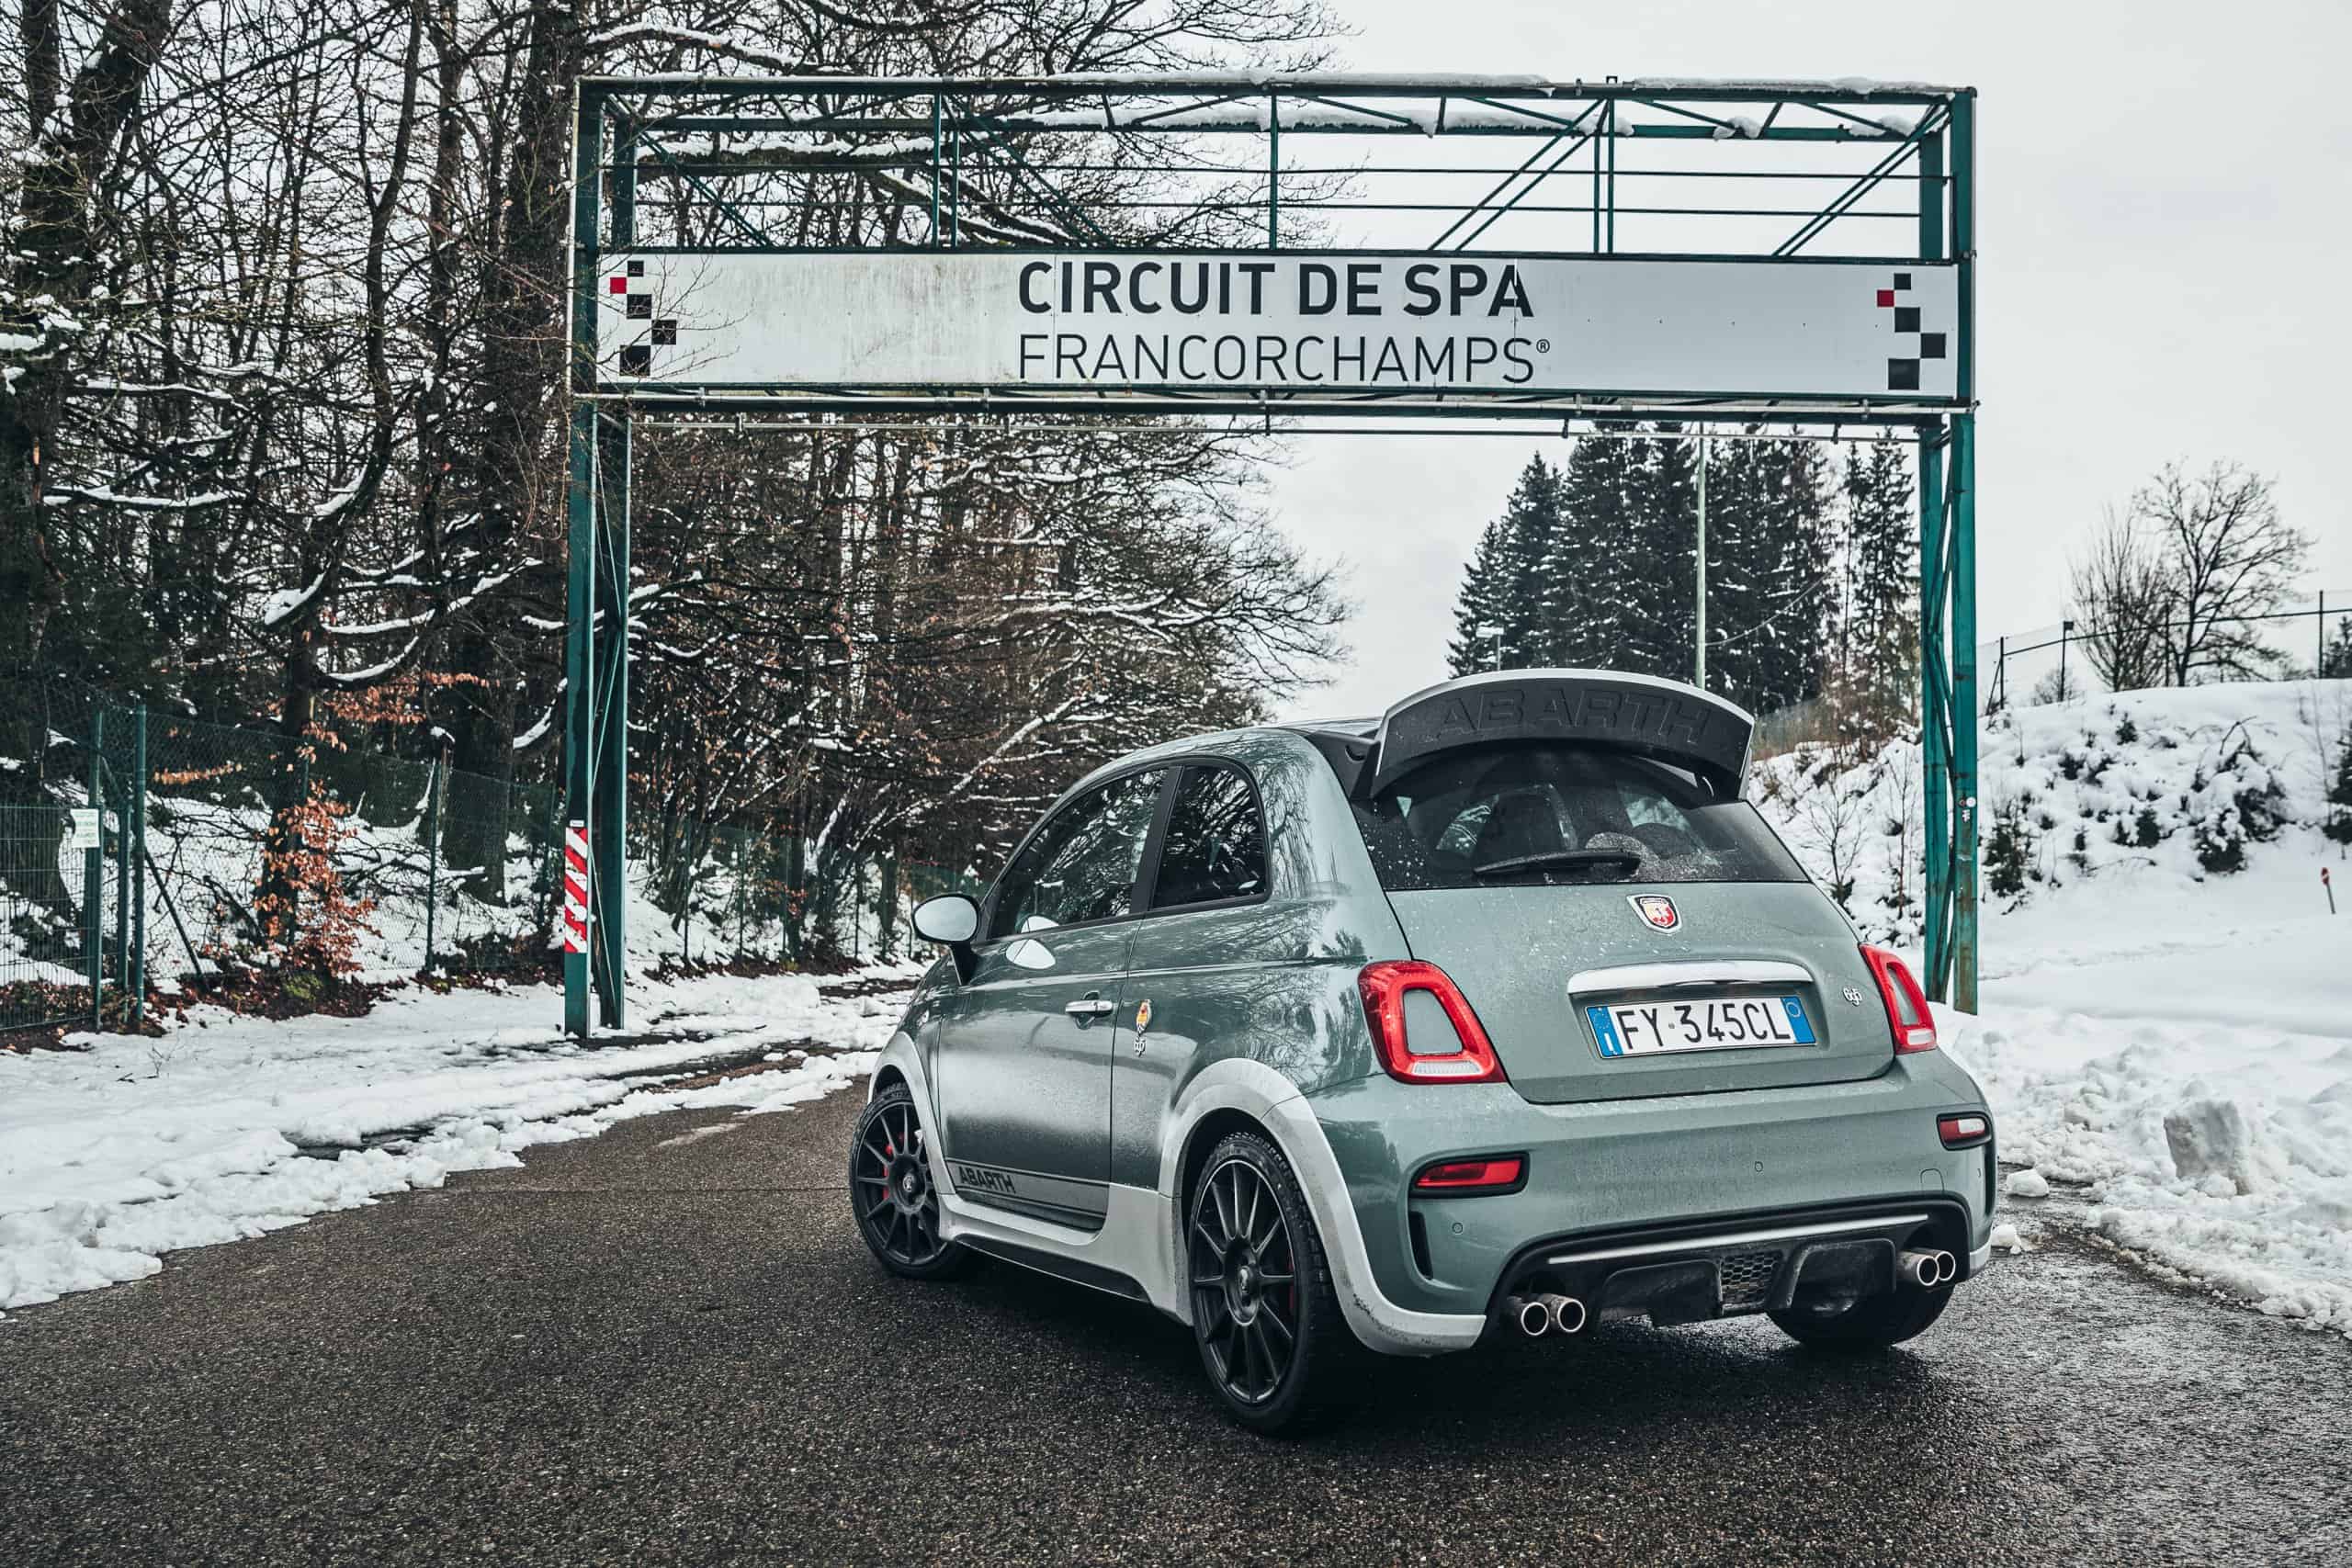 Abarth, Abarth resumes 70th anniversary tour of Europe, ClassicCars.com Journal